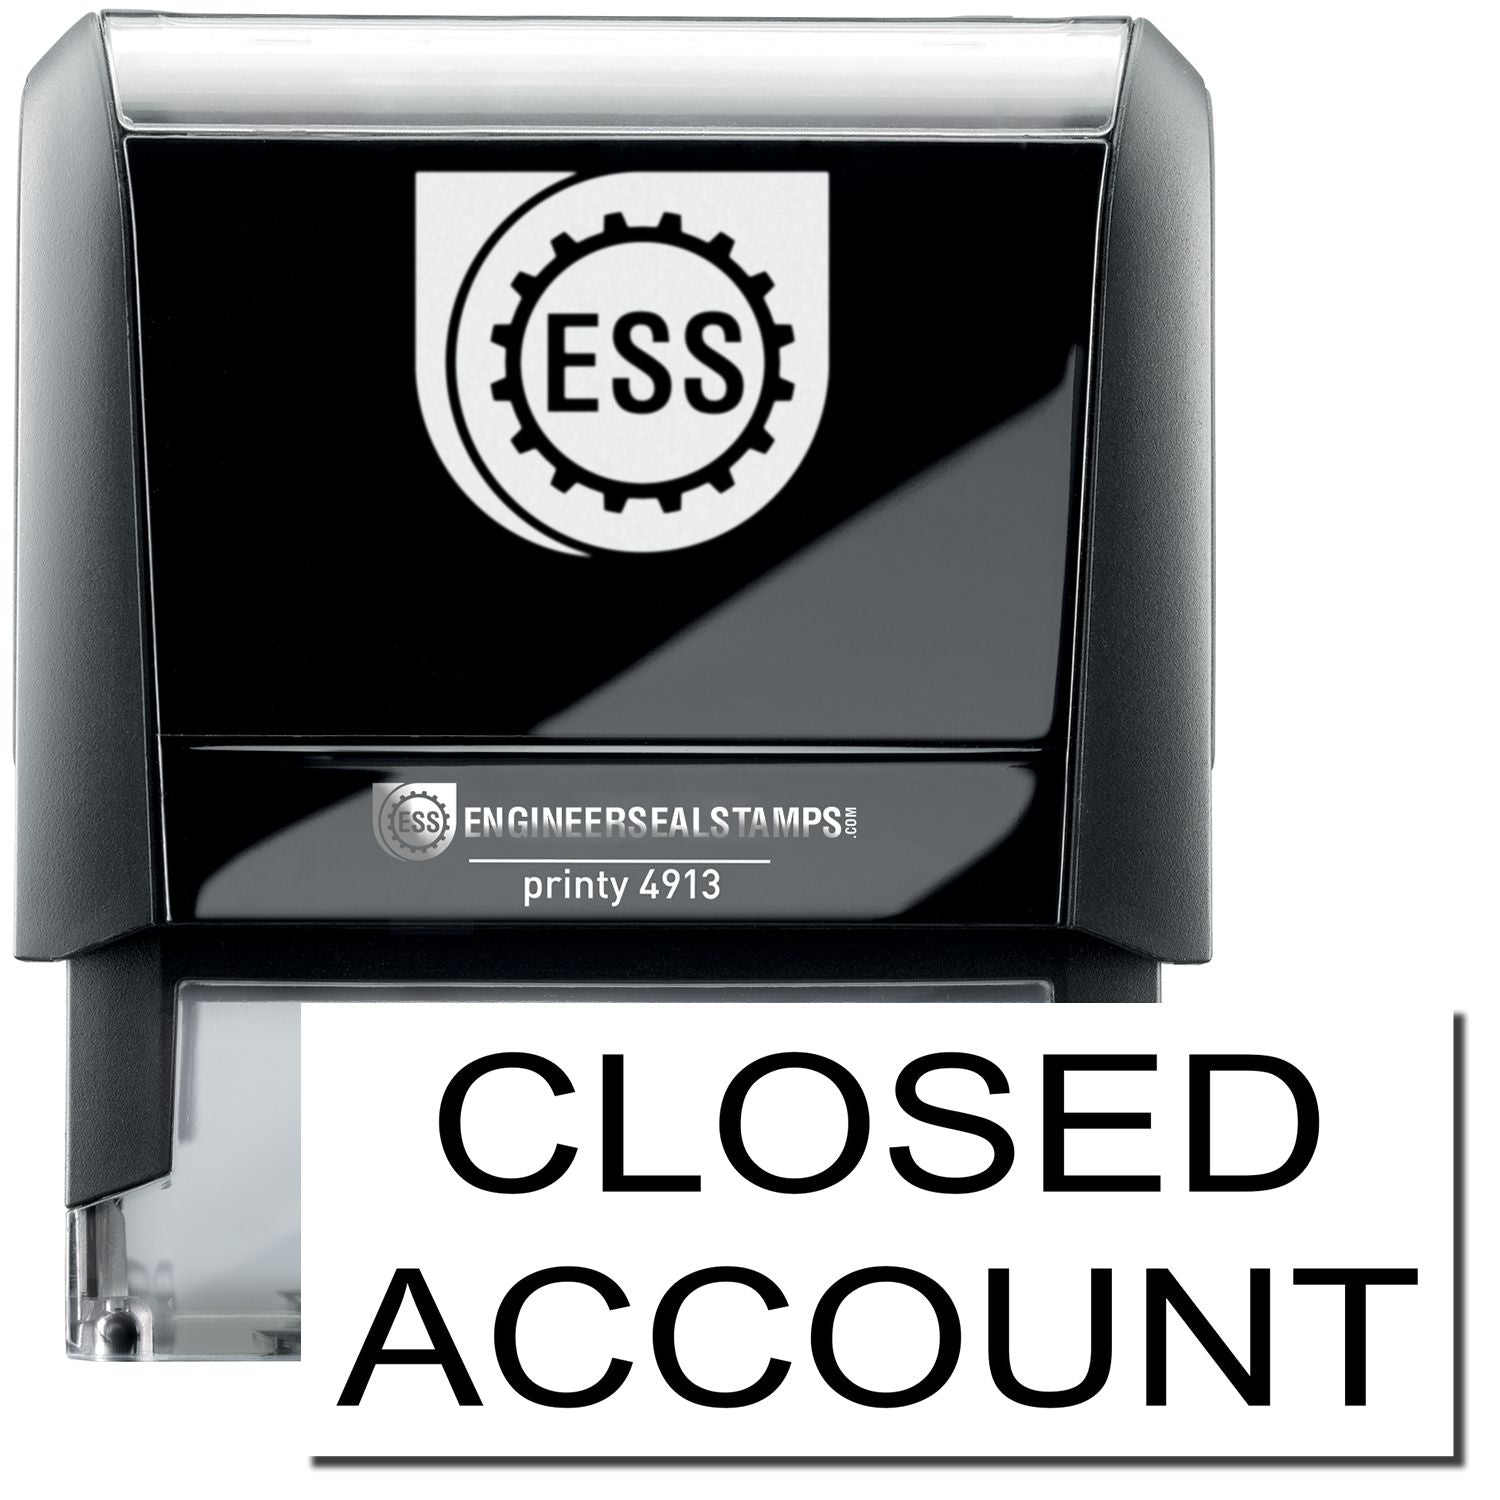 A self-inking stamp with a stamped image showing how the text "CLOSED ACCOUNT" in a large bold font is displayed by it.